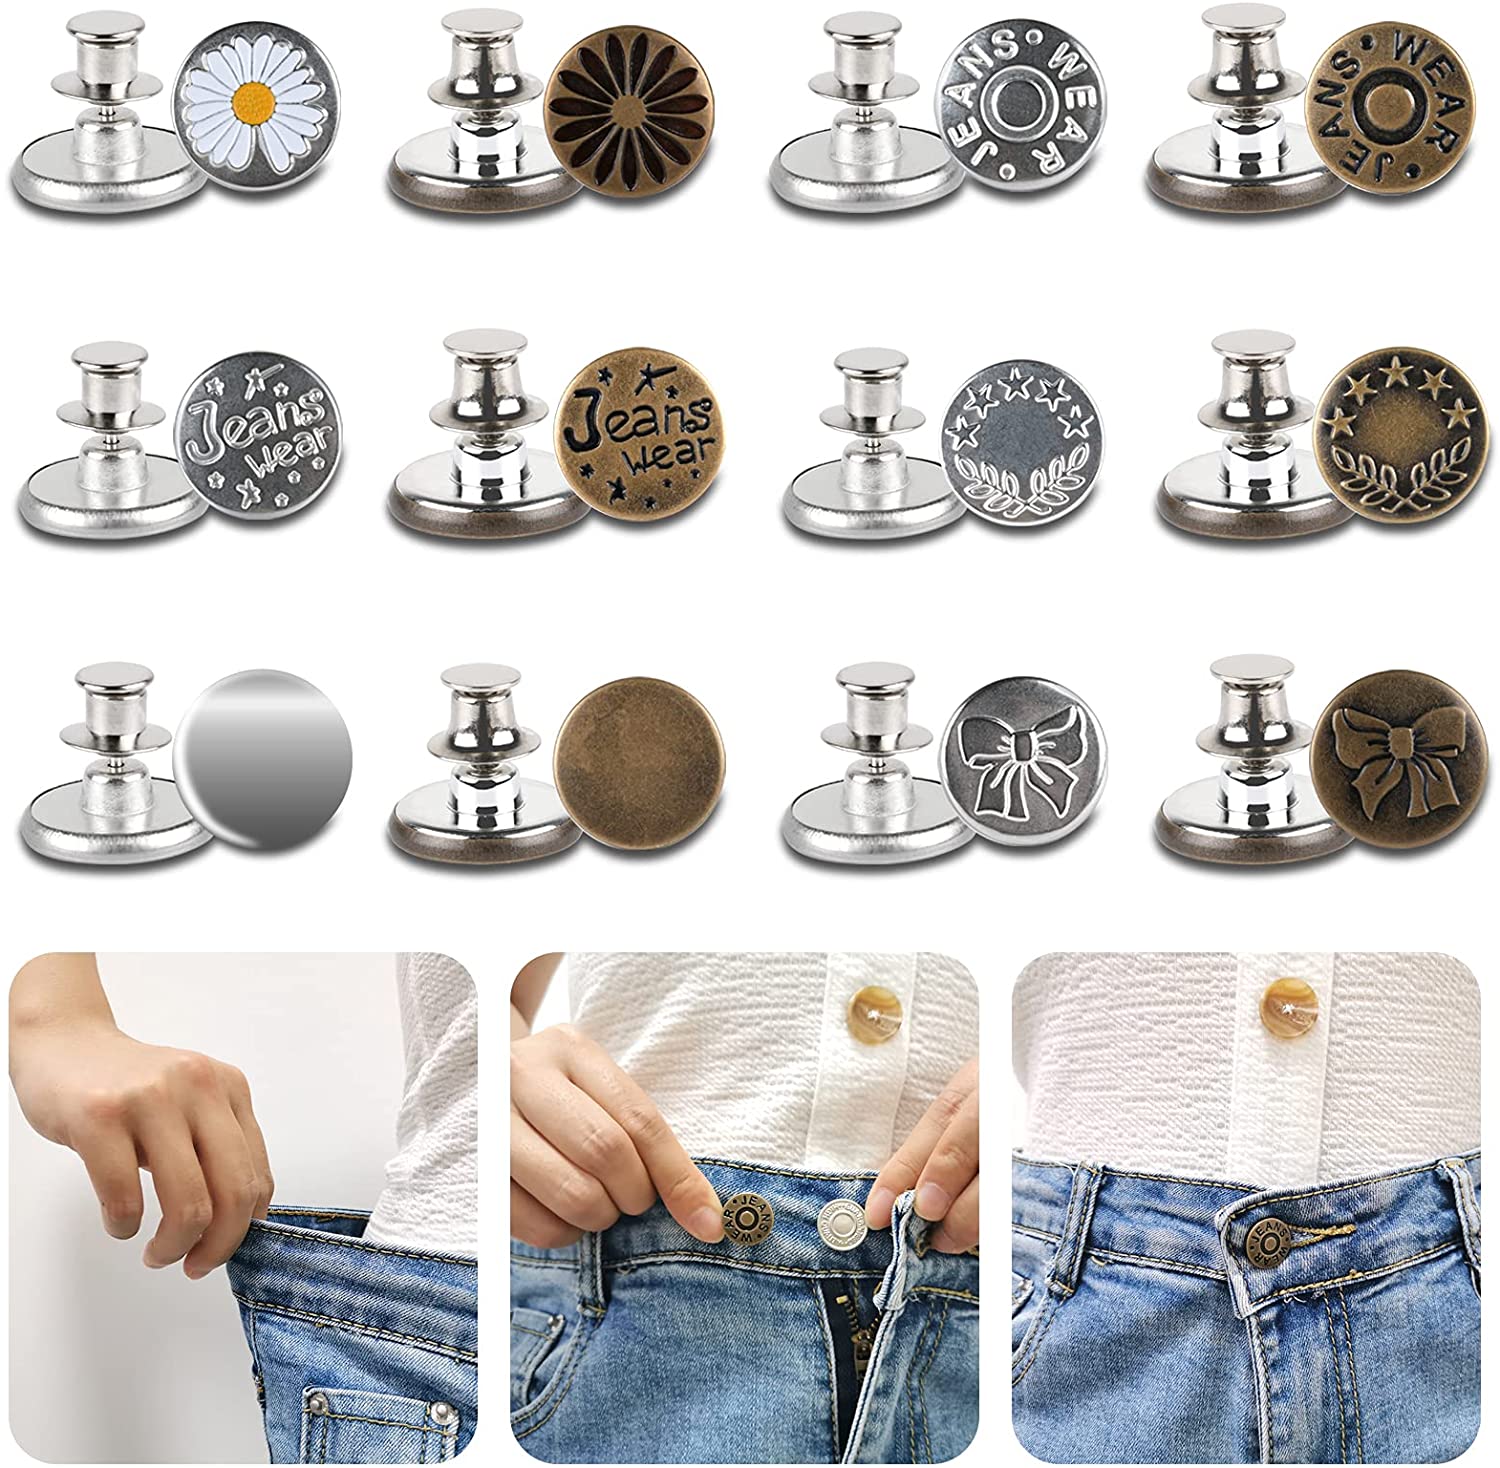 Jean Button Pins, Adjustable Button Pins for Jeans, No Sew Buttons